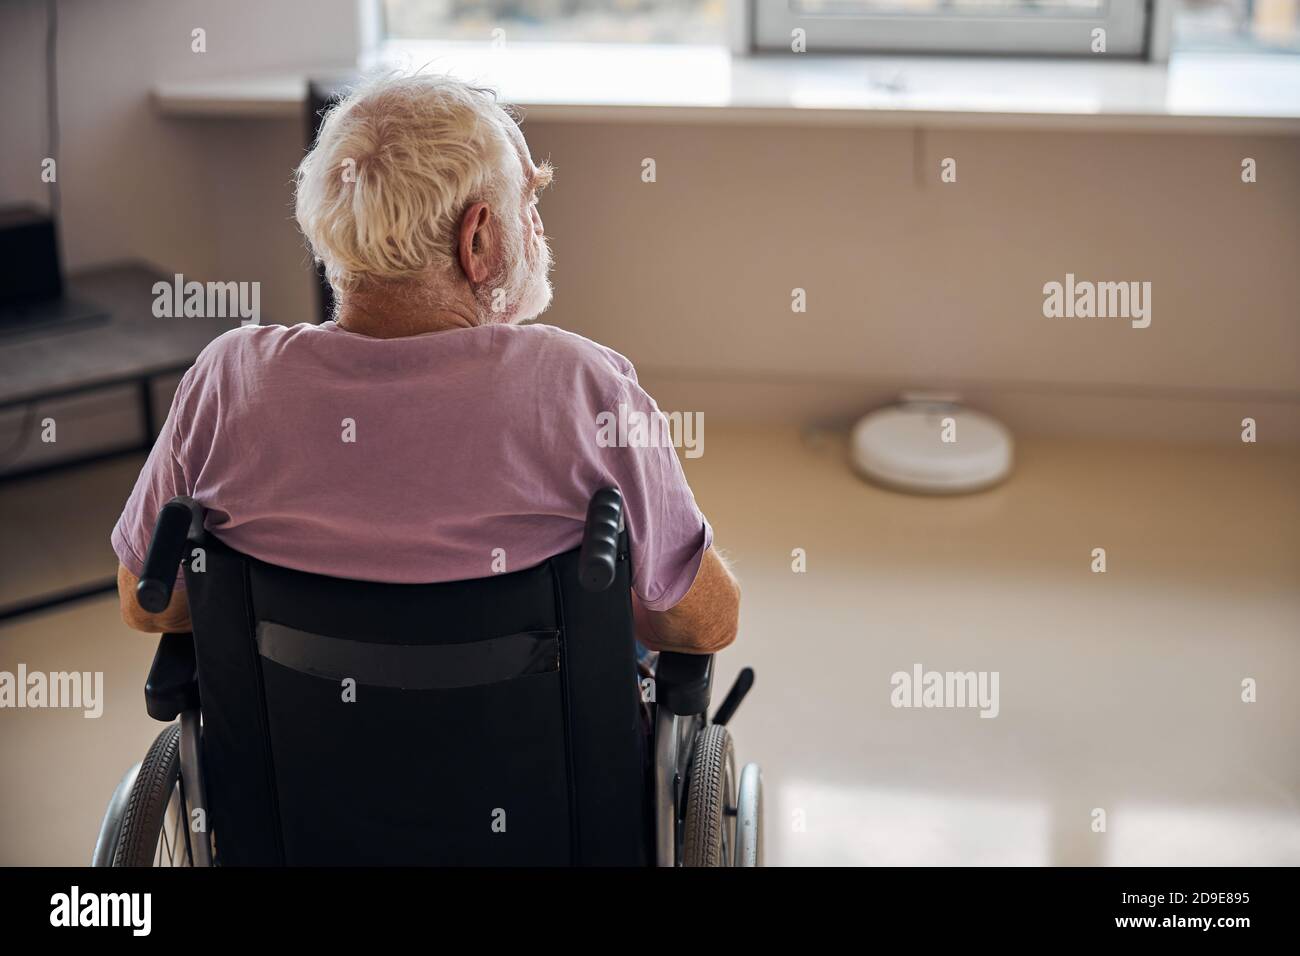 Disabled person in a t-shirt looking away Stock Photo